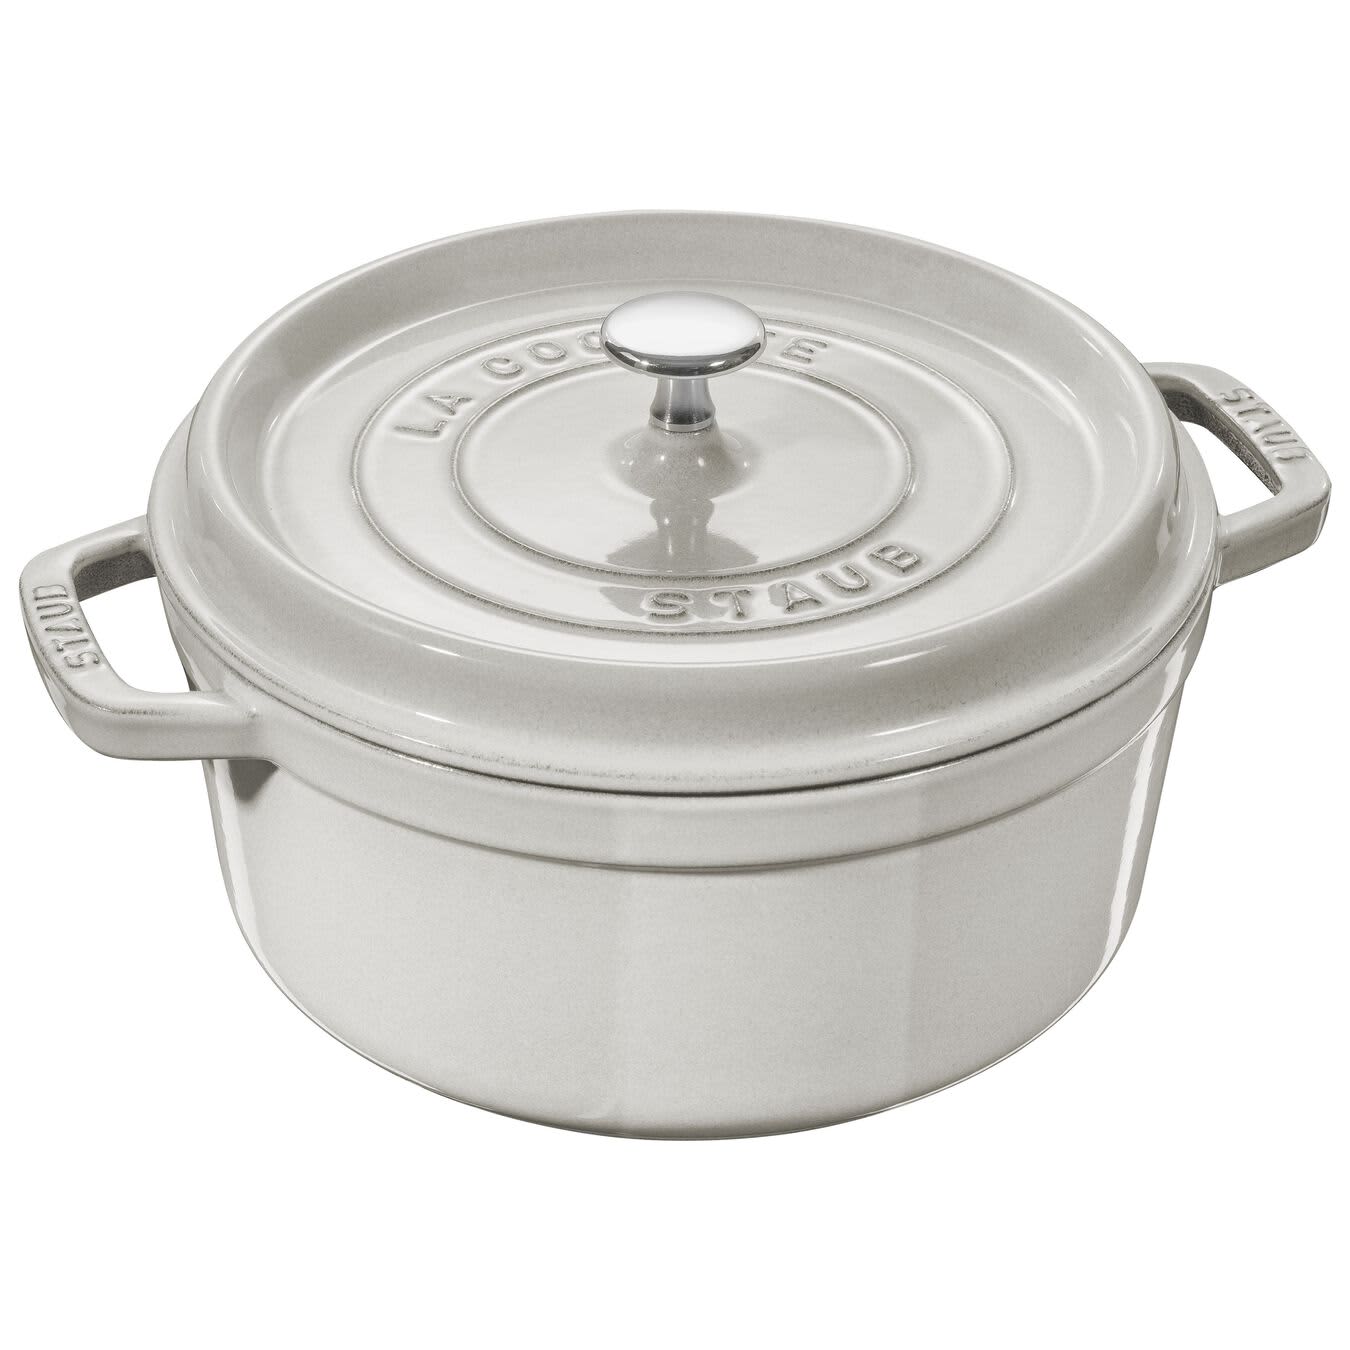 https://cdn.apartmenttherapy.info/image/upload/v1598538005/k/Edit/2020-K-Gift-Guides-Cooking-Kitchen-Gifts/staub_cocotte.jpg